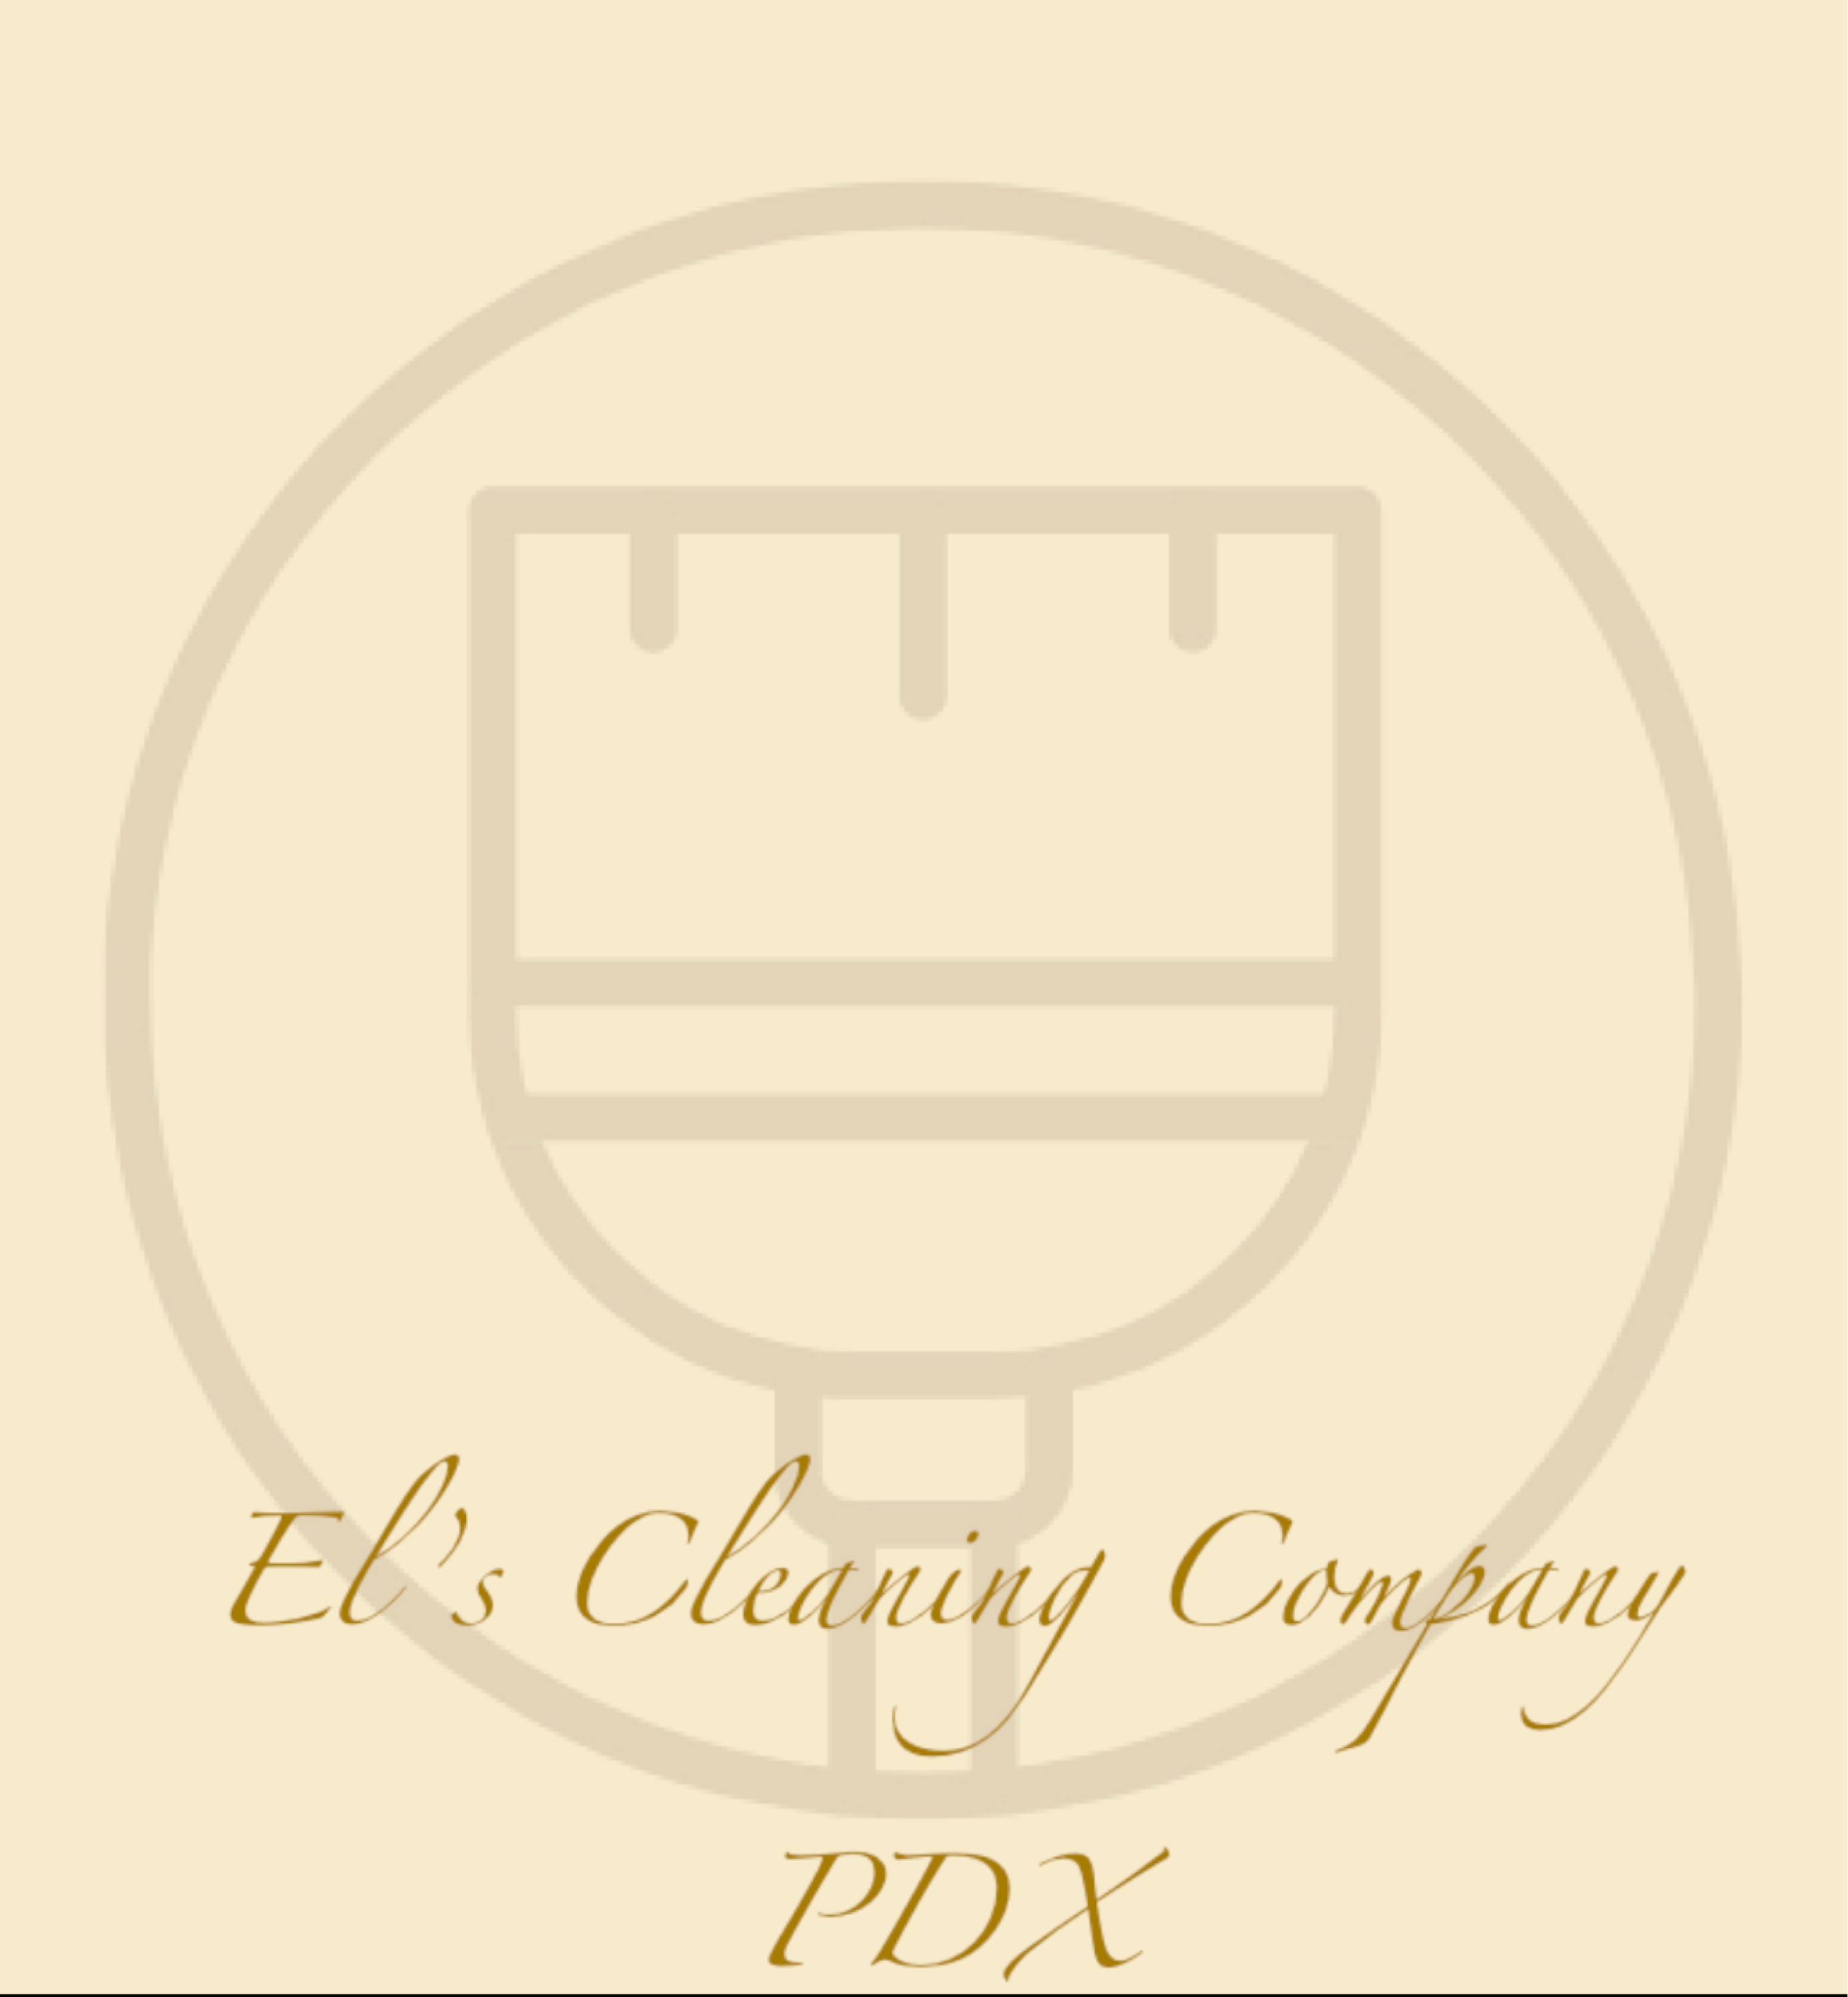 Els Cleaning Company PDX Logo